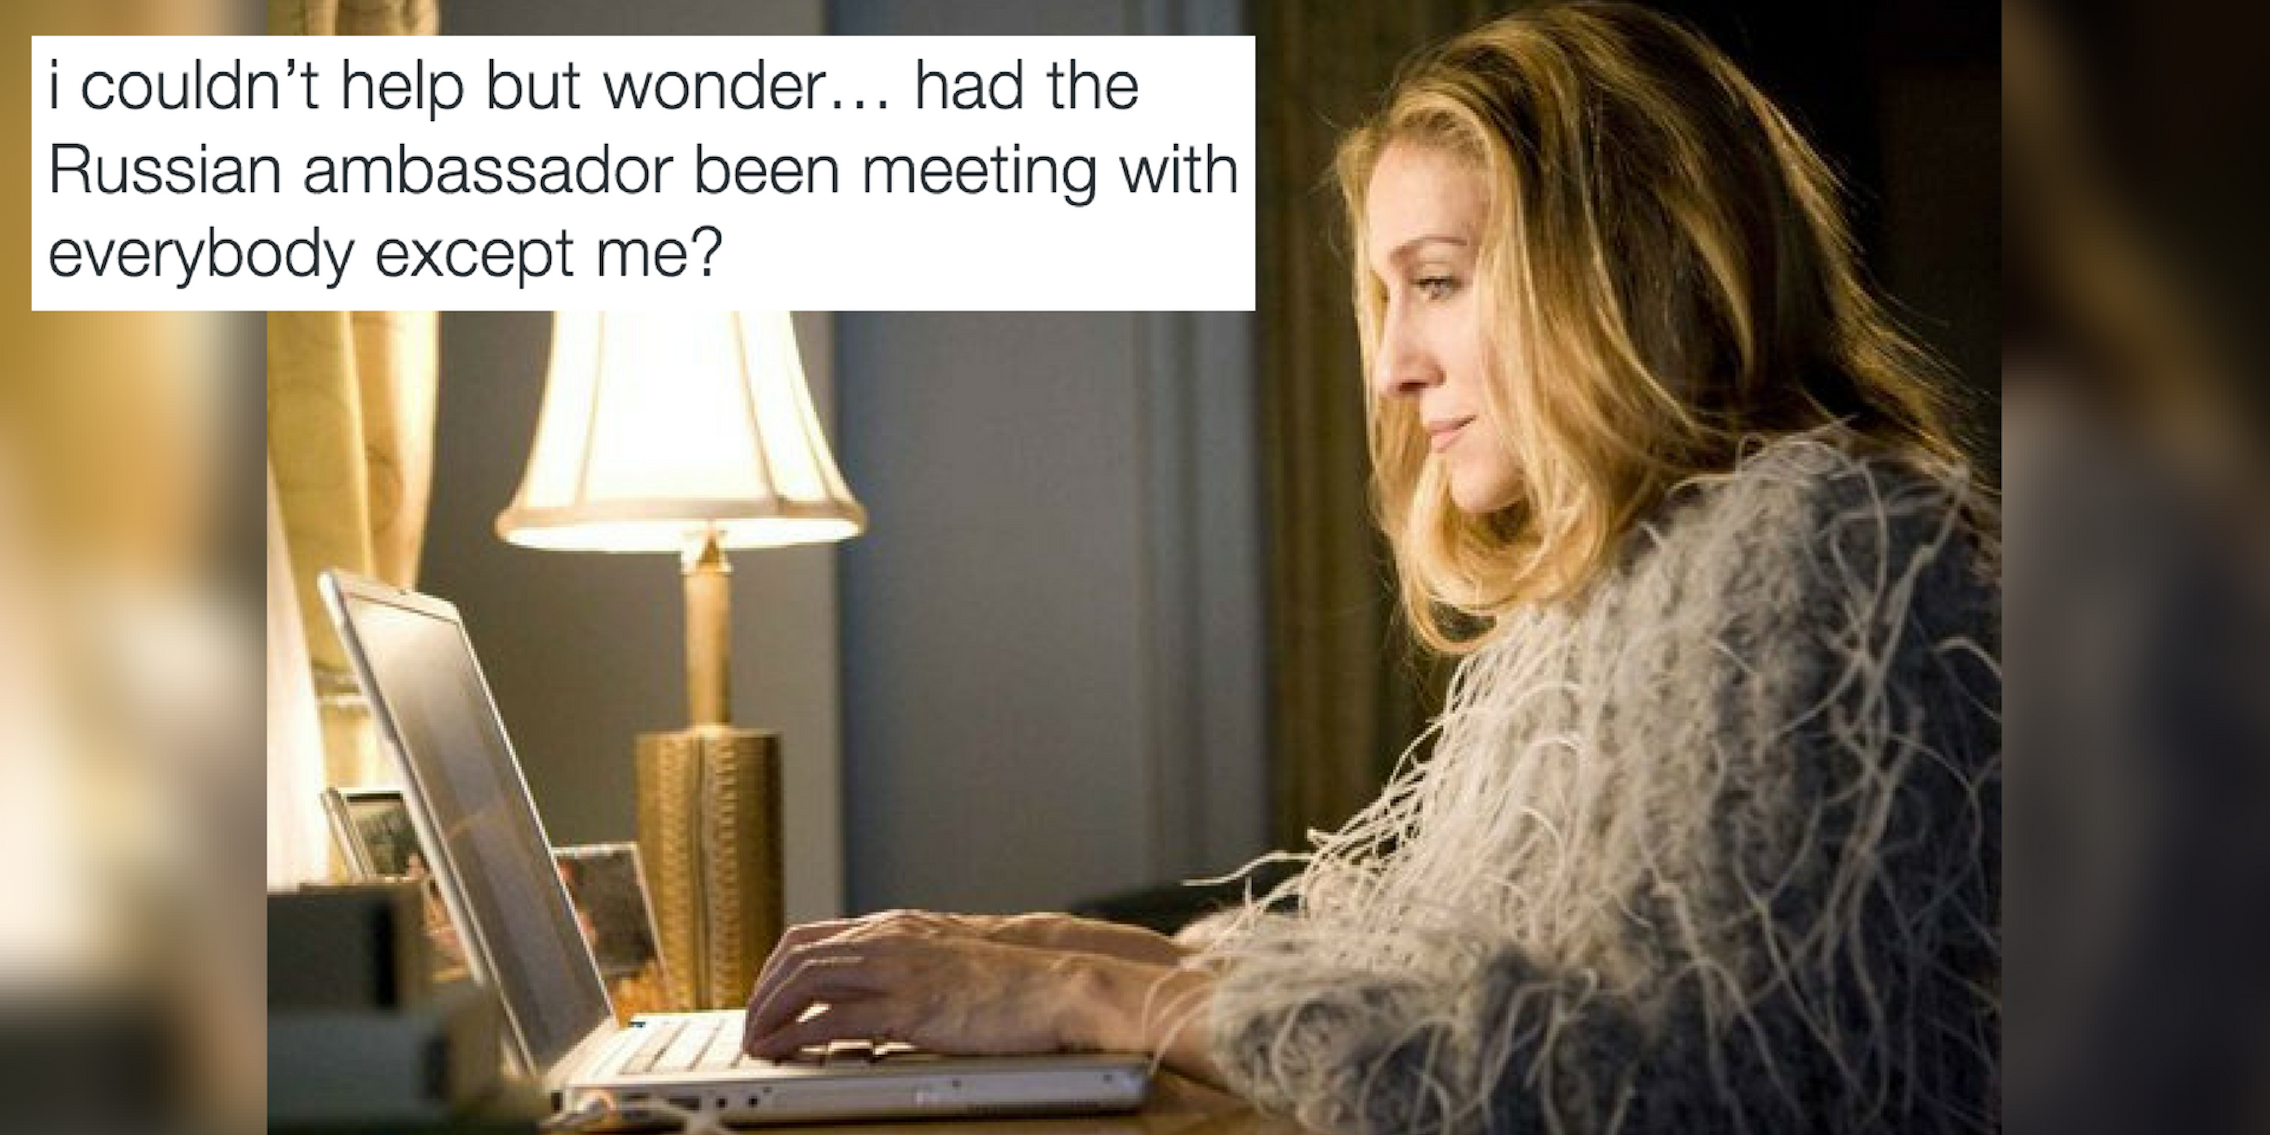 An image of Sarah Jessica Parker's 'Sex and the City' character Carrie Bradshaw with a tweet about the Russian ambassador.